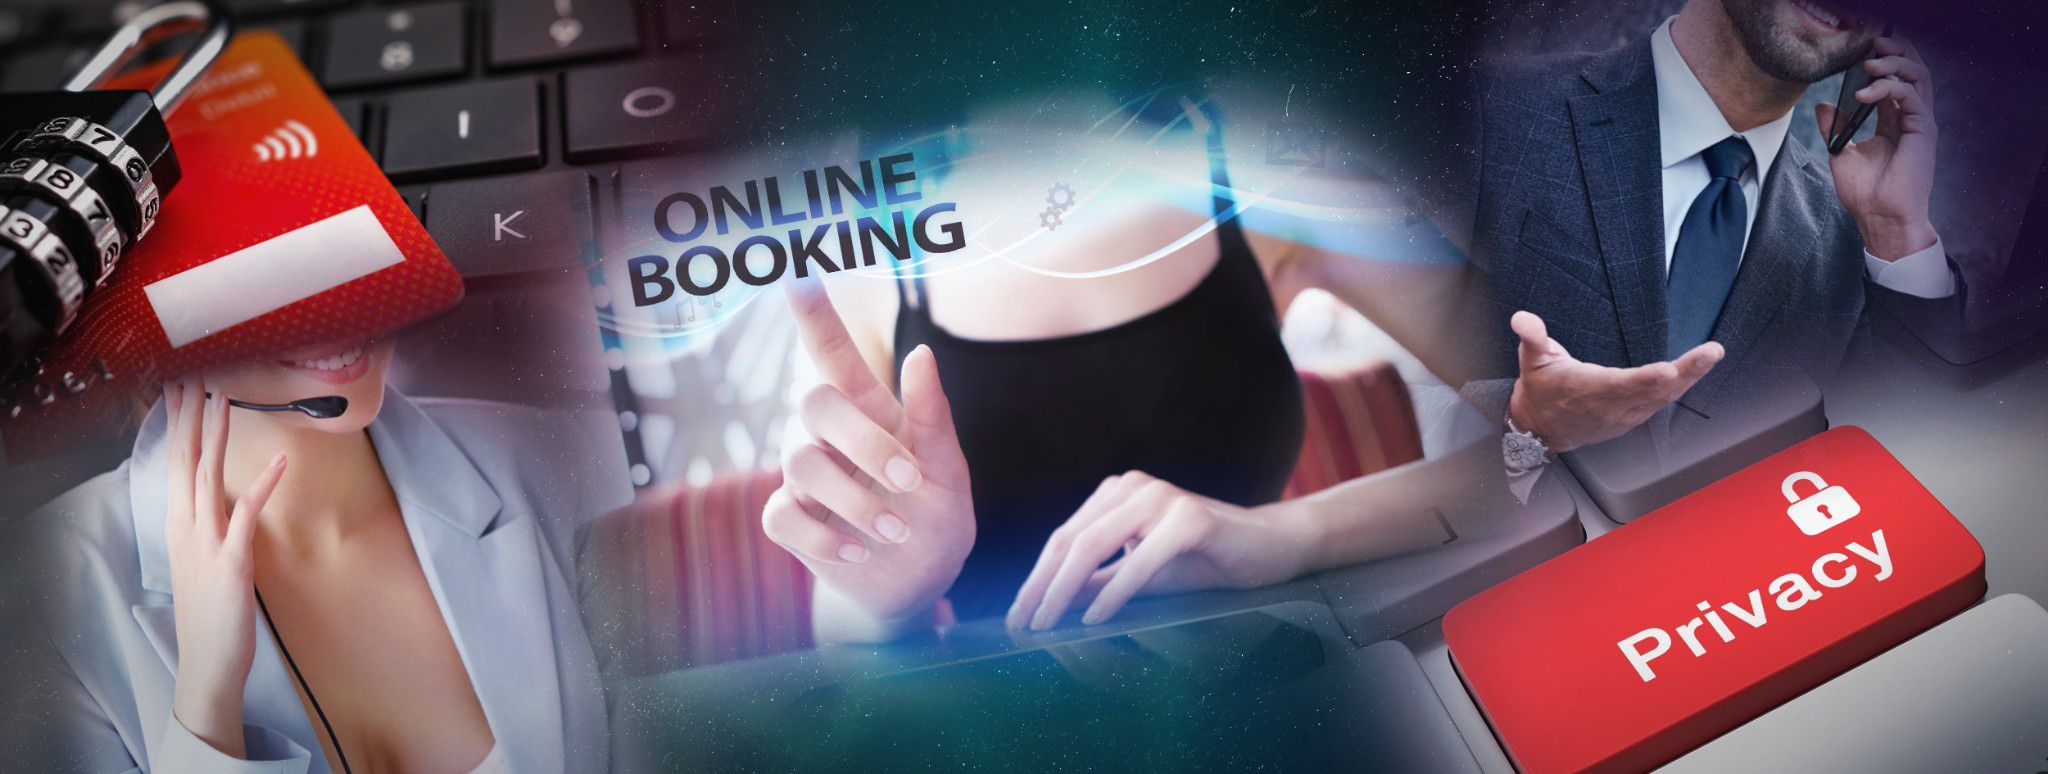 Online bookings and confidentiality